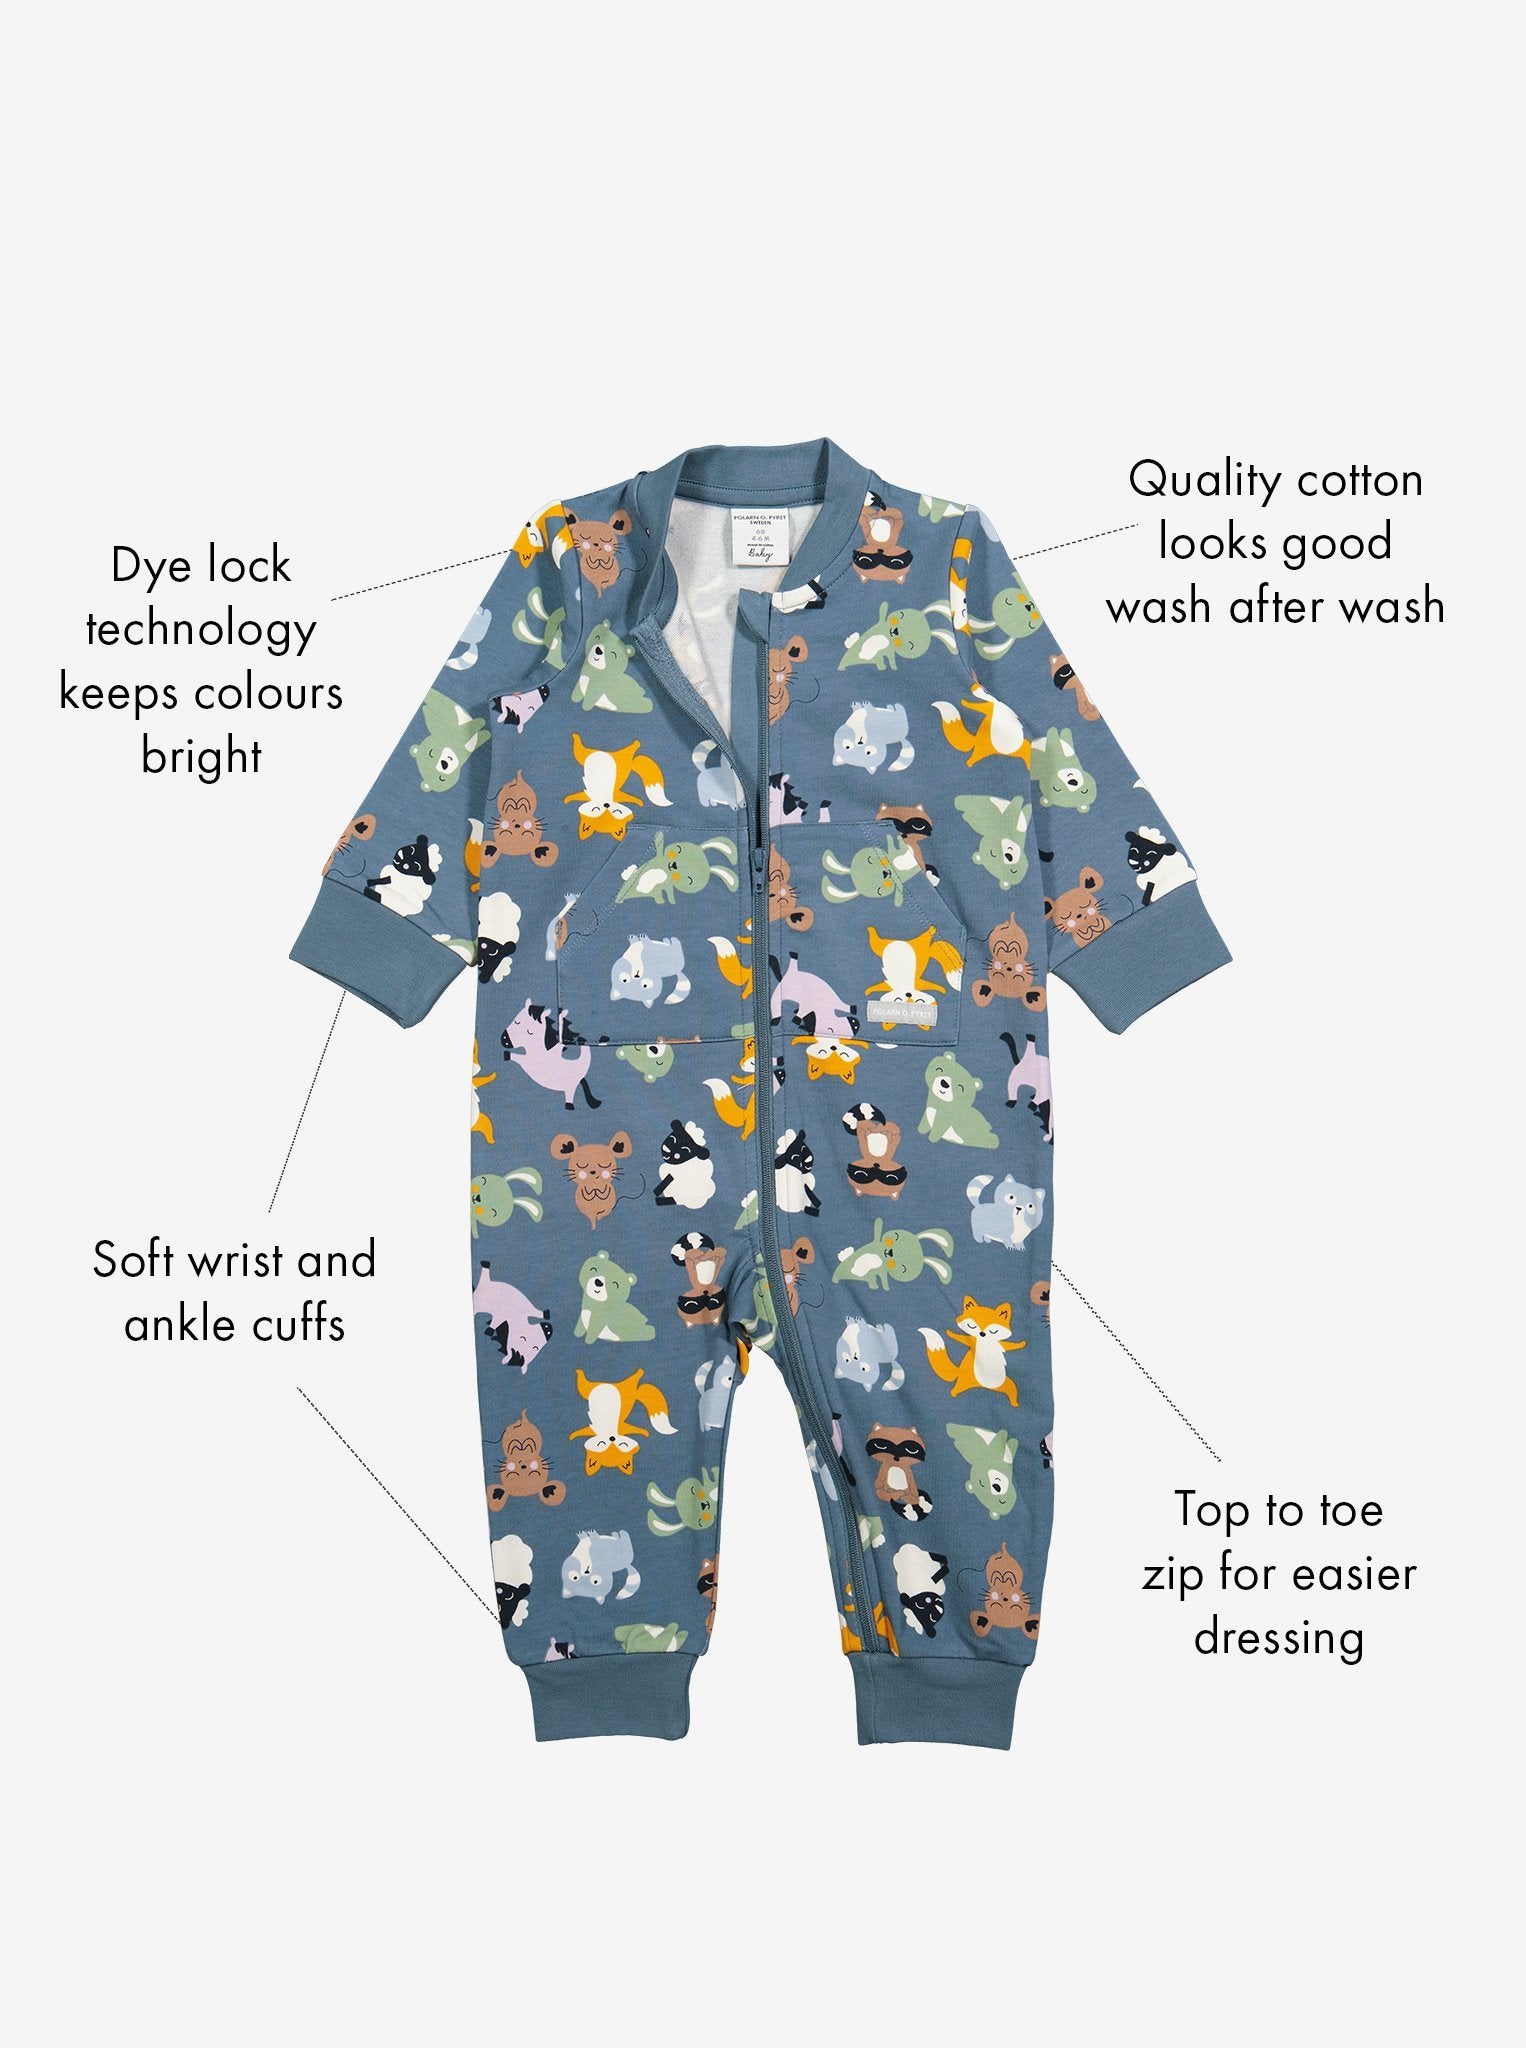  Organic Blue Animal Print Baby Romper from Polarn O. Pyret Kidswear. Made from environmentally friendly materials.